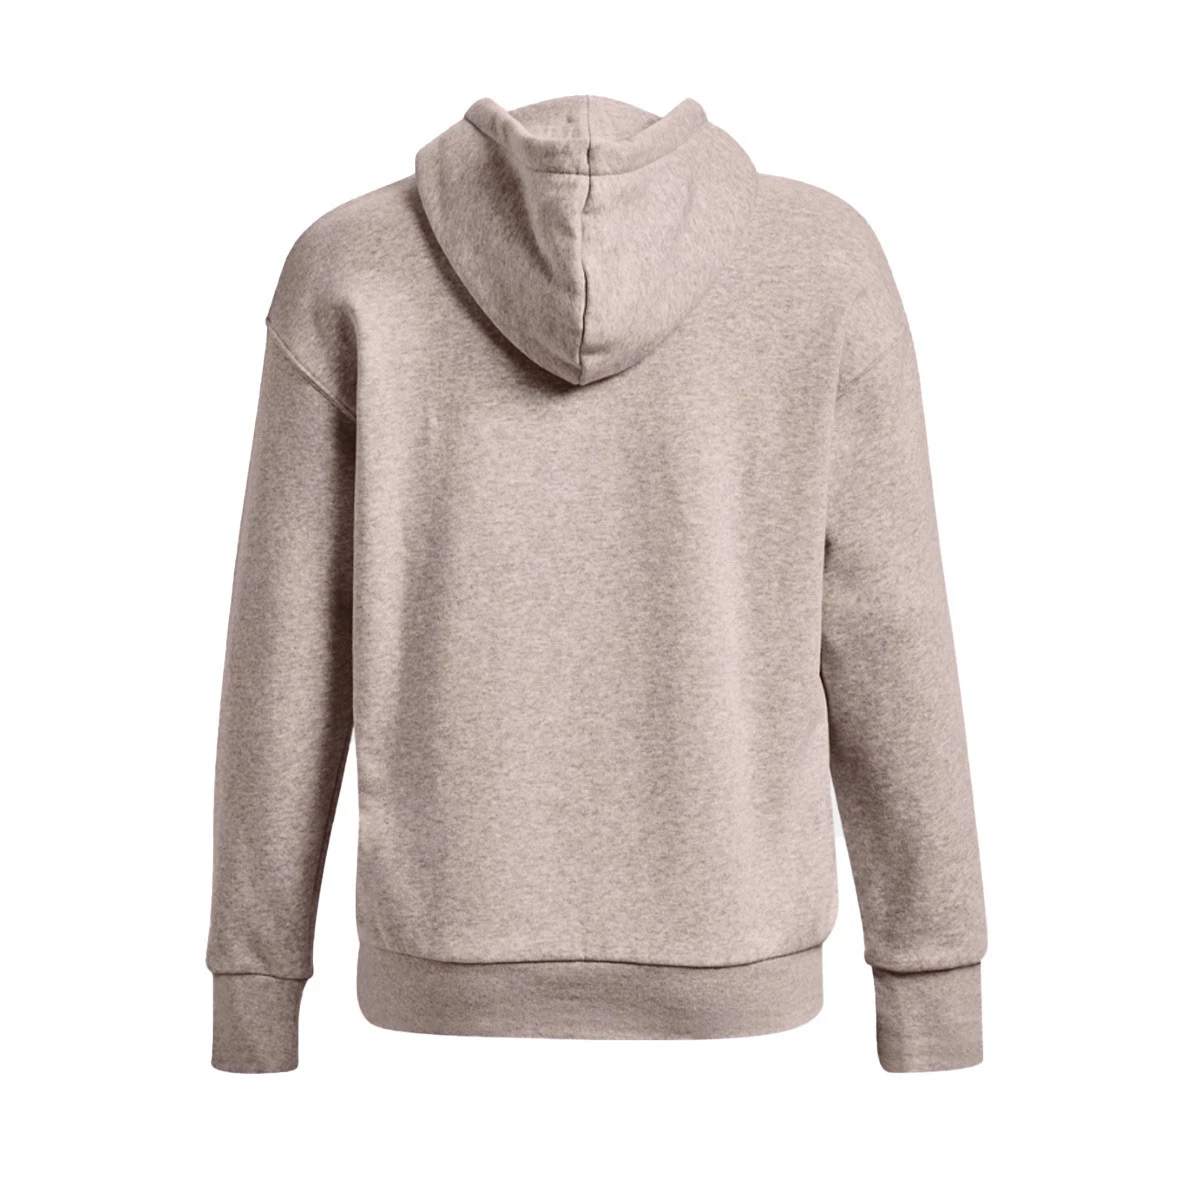 Sudadera Under Armour Funnel Neck mujer